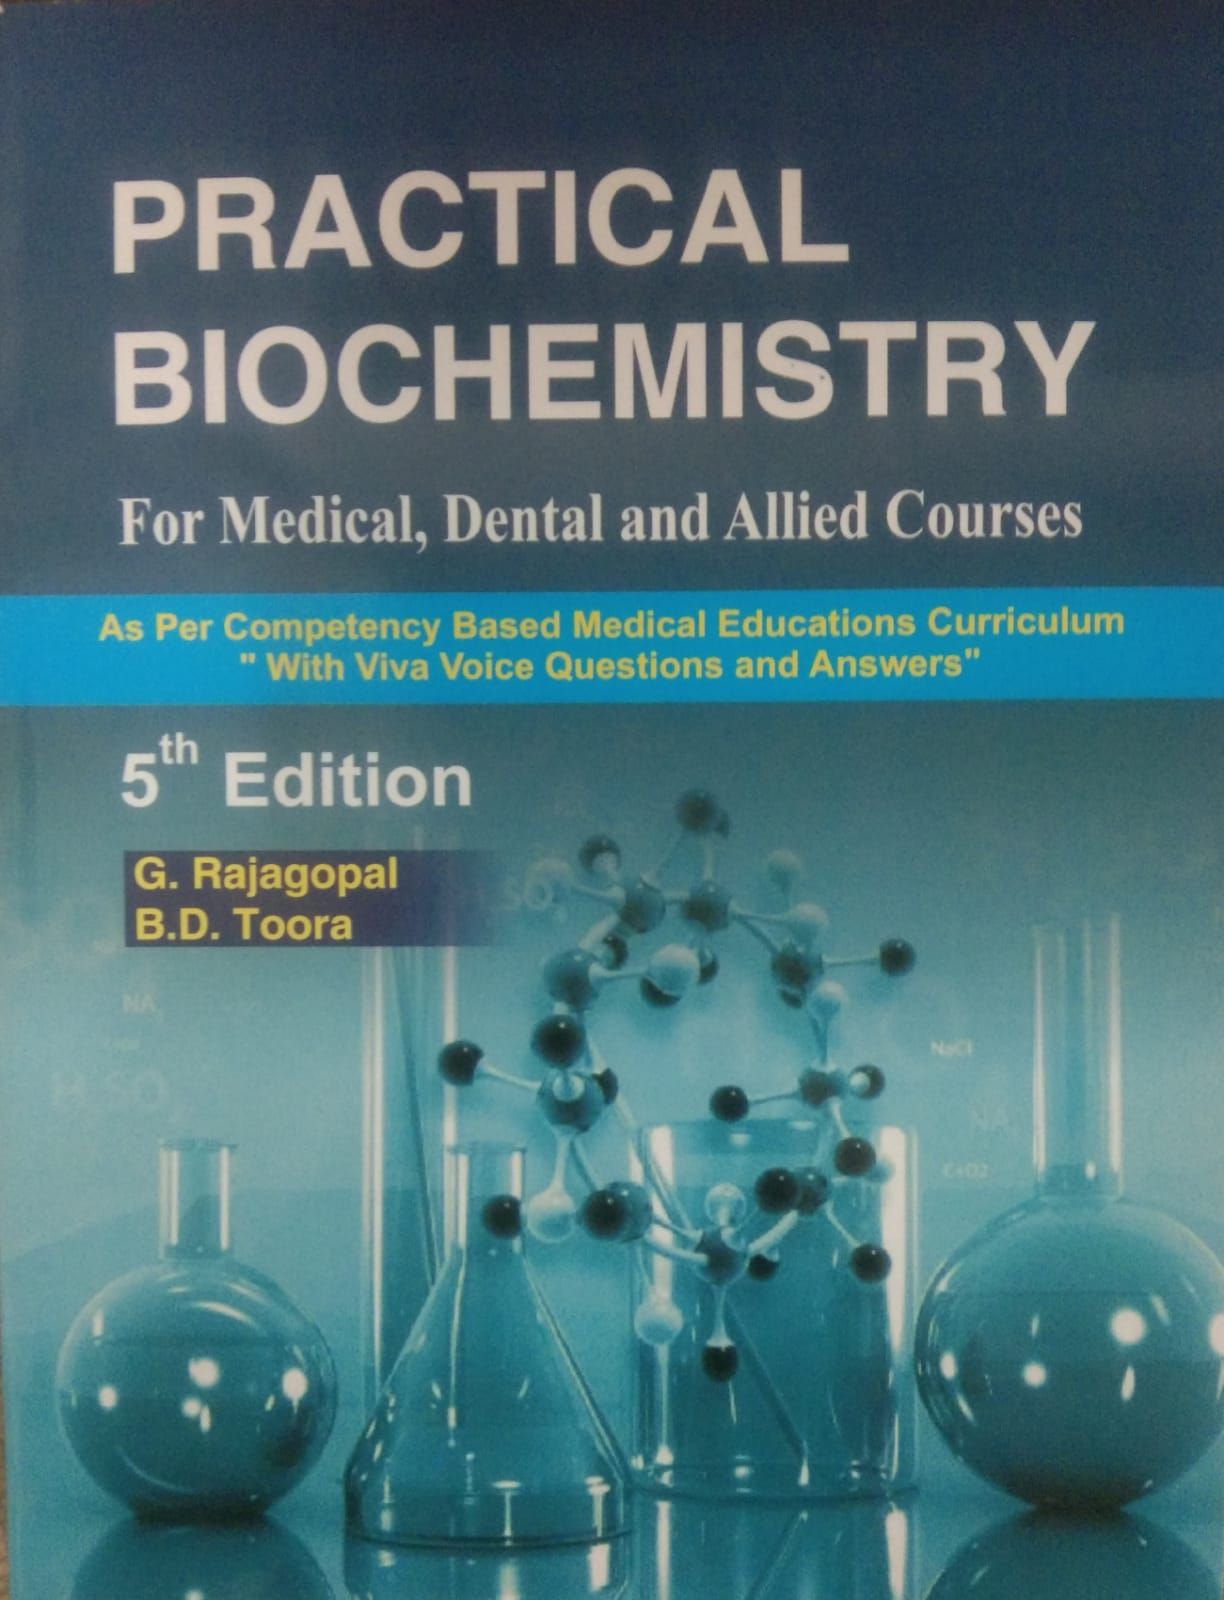 

general-books/general/practical-biochemistry-for-medical-dental-and-allied-courses-as-per-competency-based-medical-educations-curriculum-with-viva-voice-question-and-answers-5-ed--9789380316864